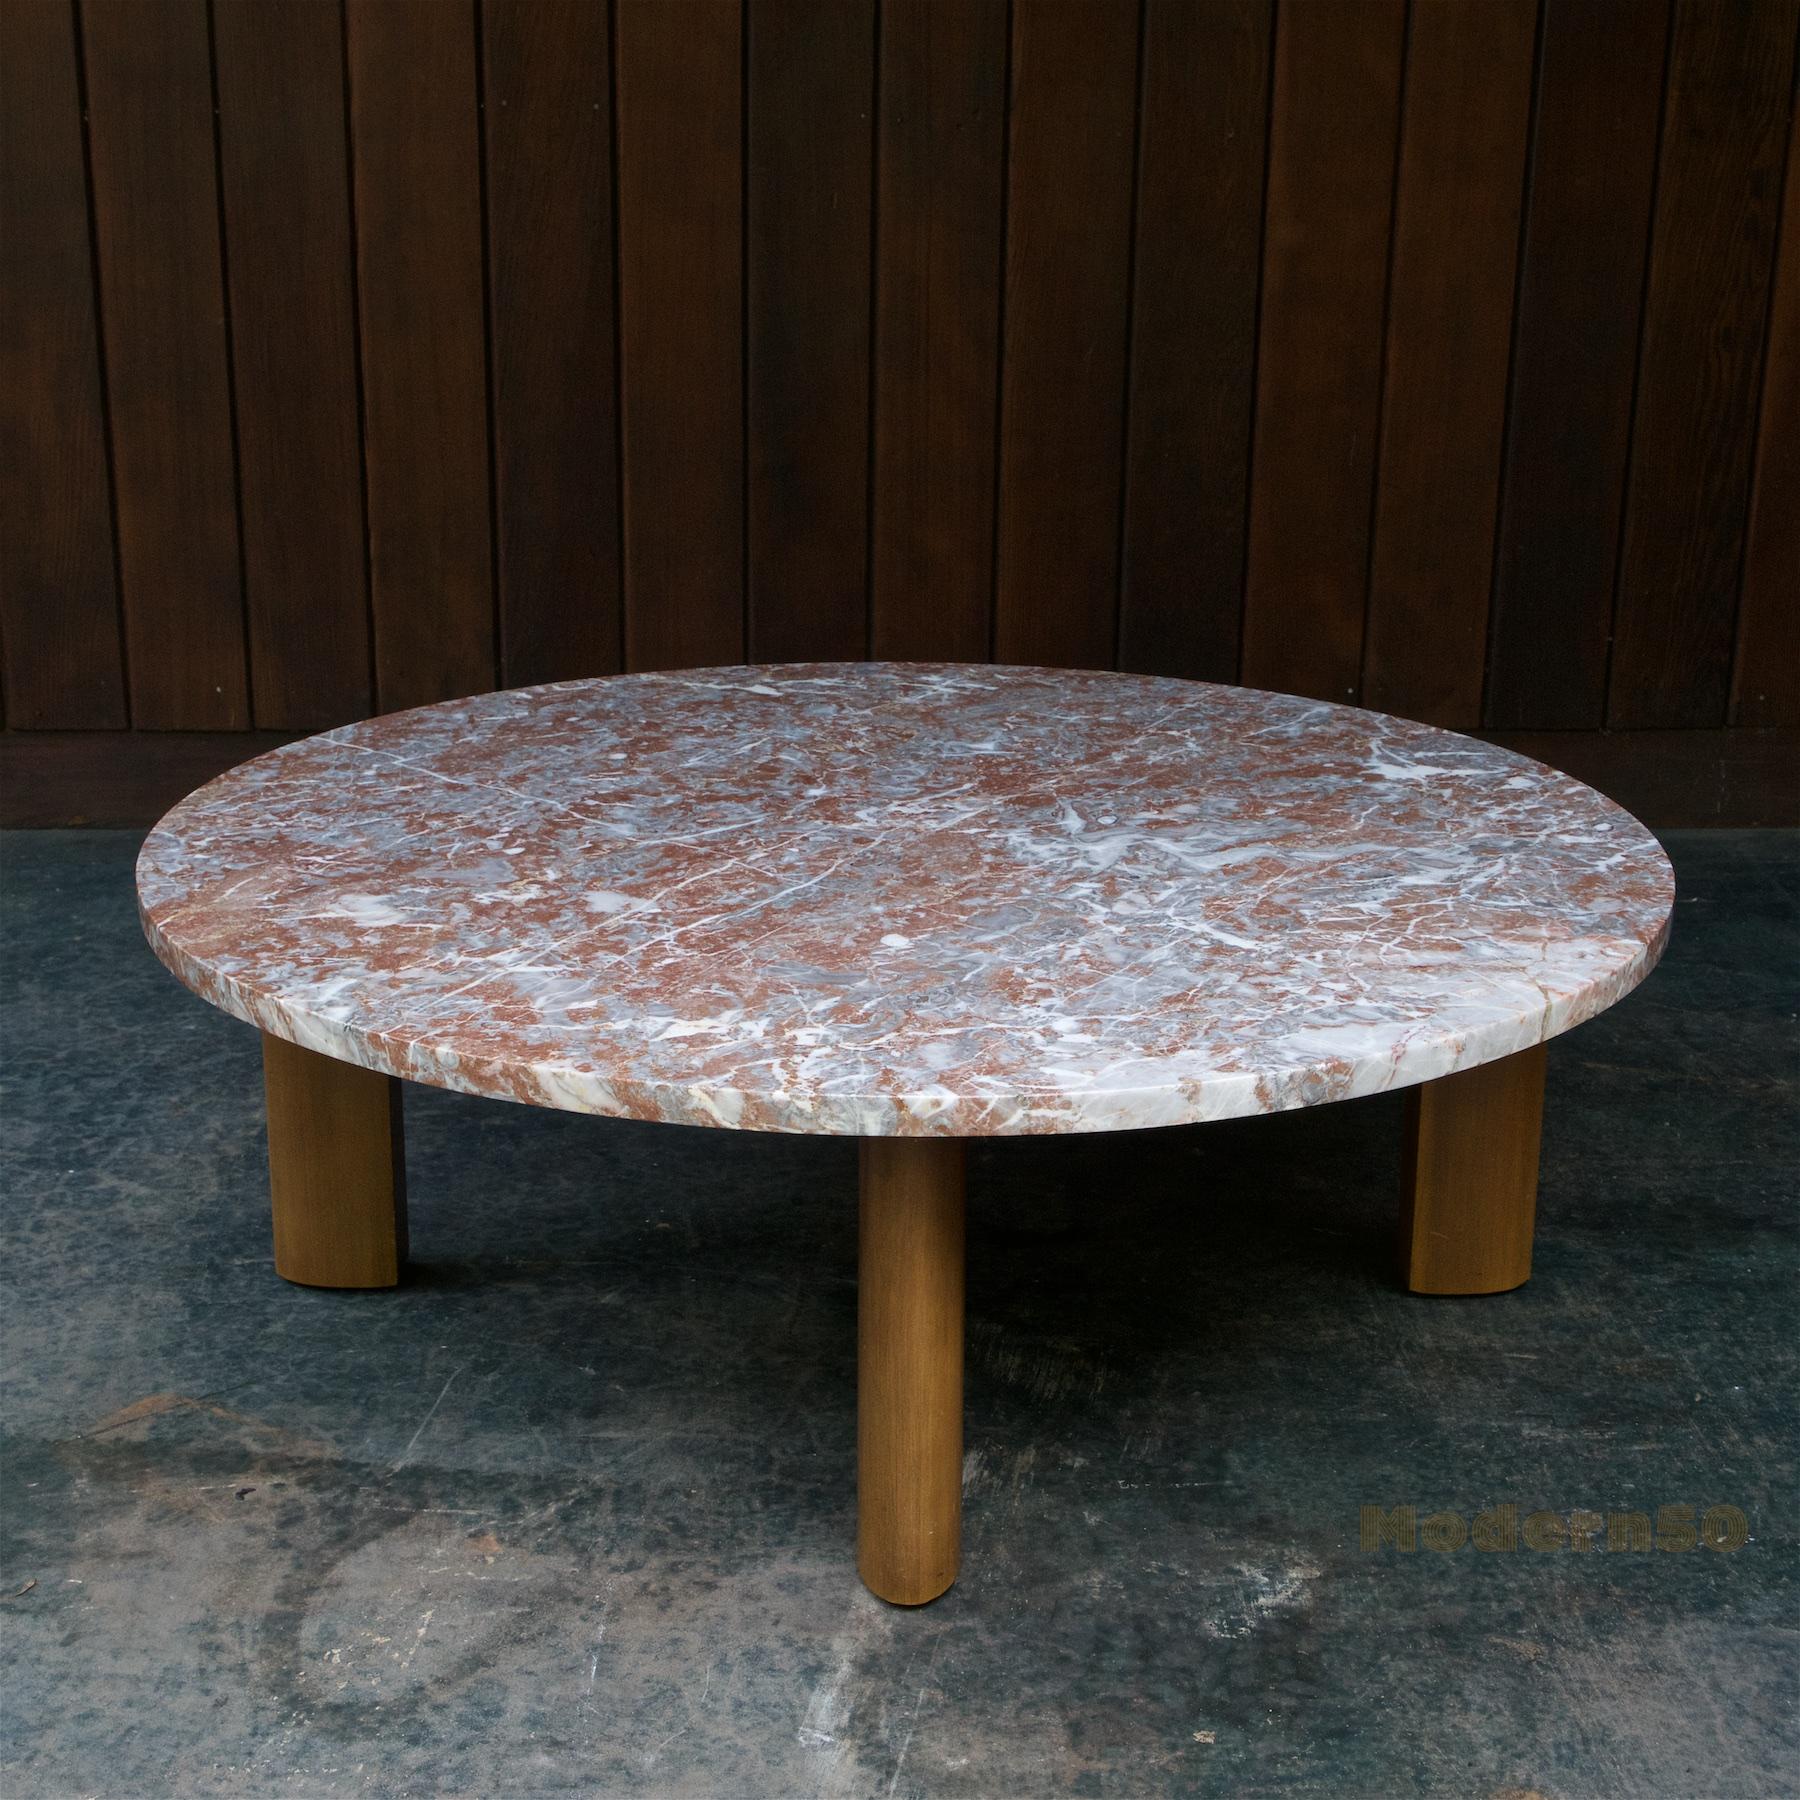 Heavy warm red veined flat-edged round circular marble slab, mahogany sculptural leg base. Photographed outside in natural light, so will appear darker indoors.